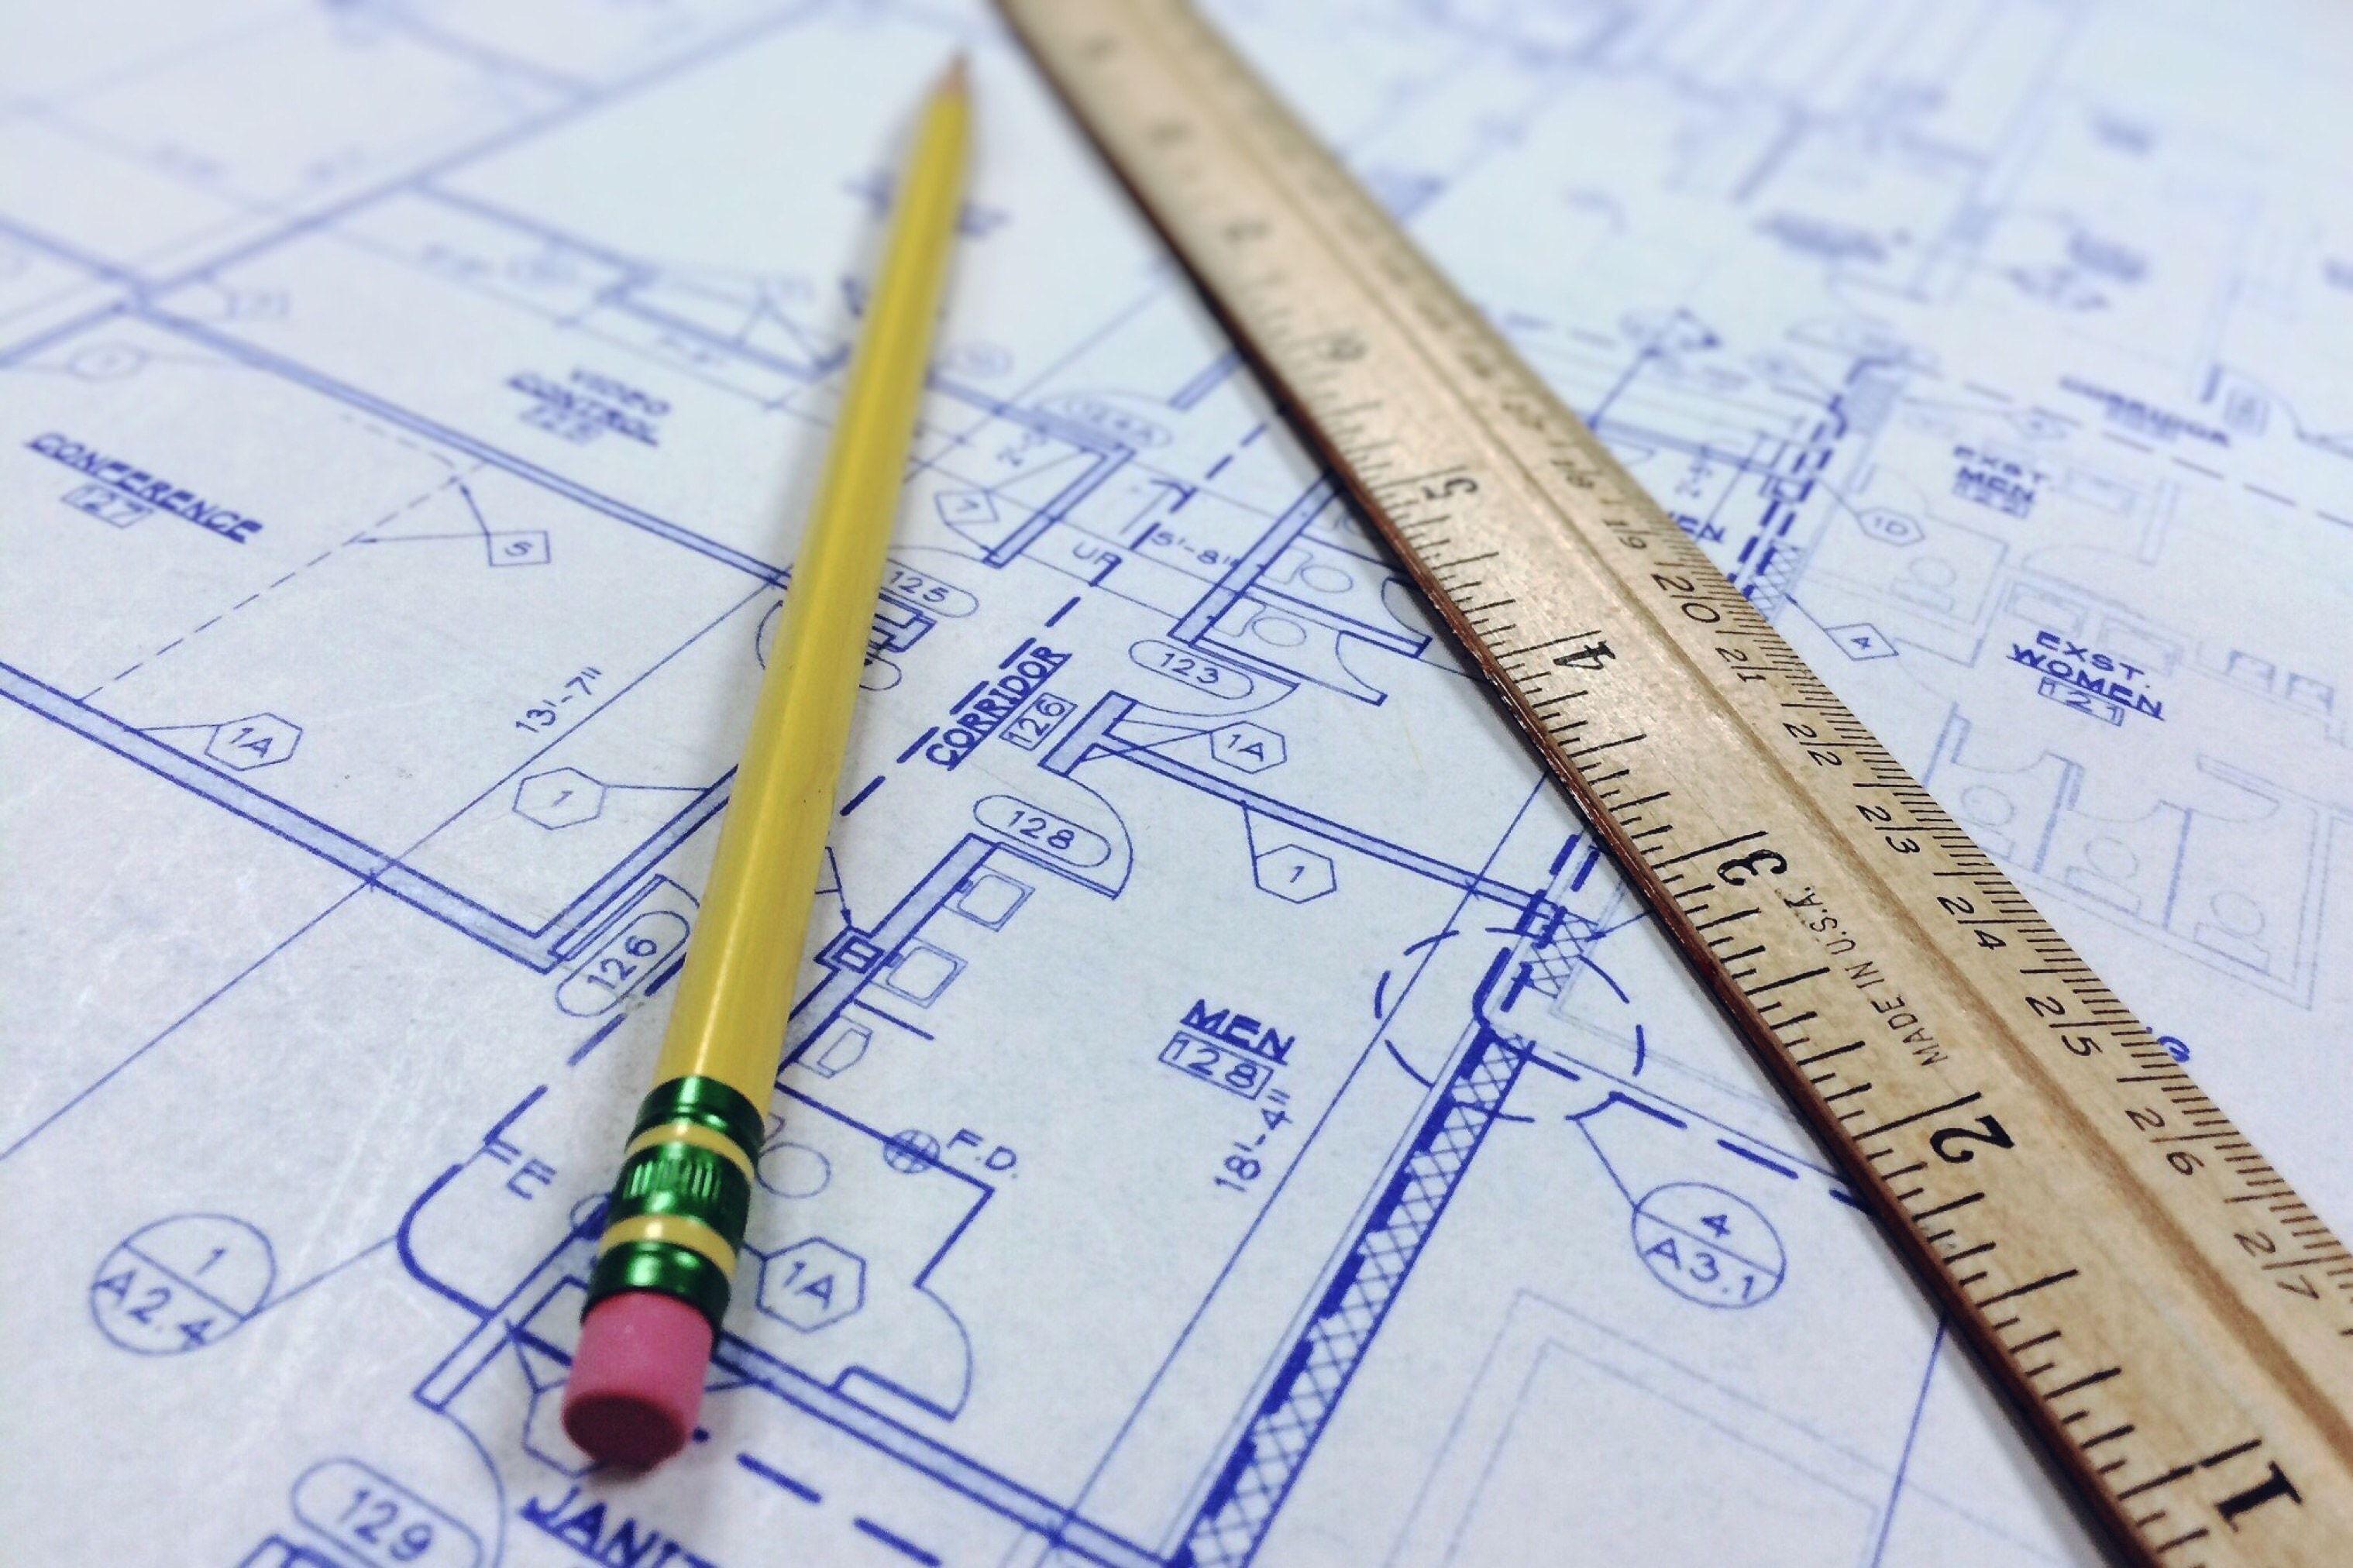 brown ruler and pencil at the top of floor plan paper free image